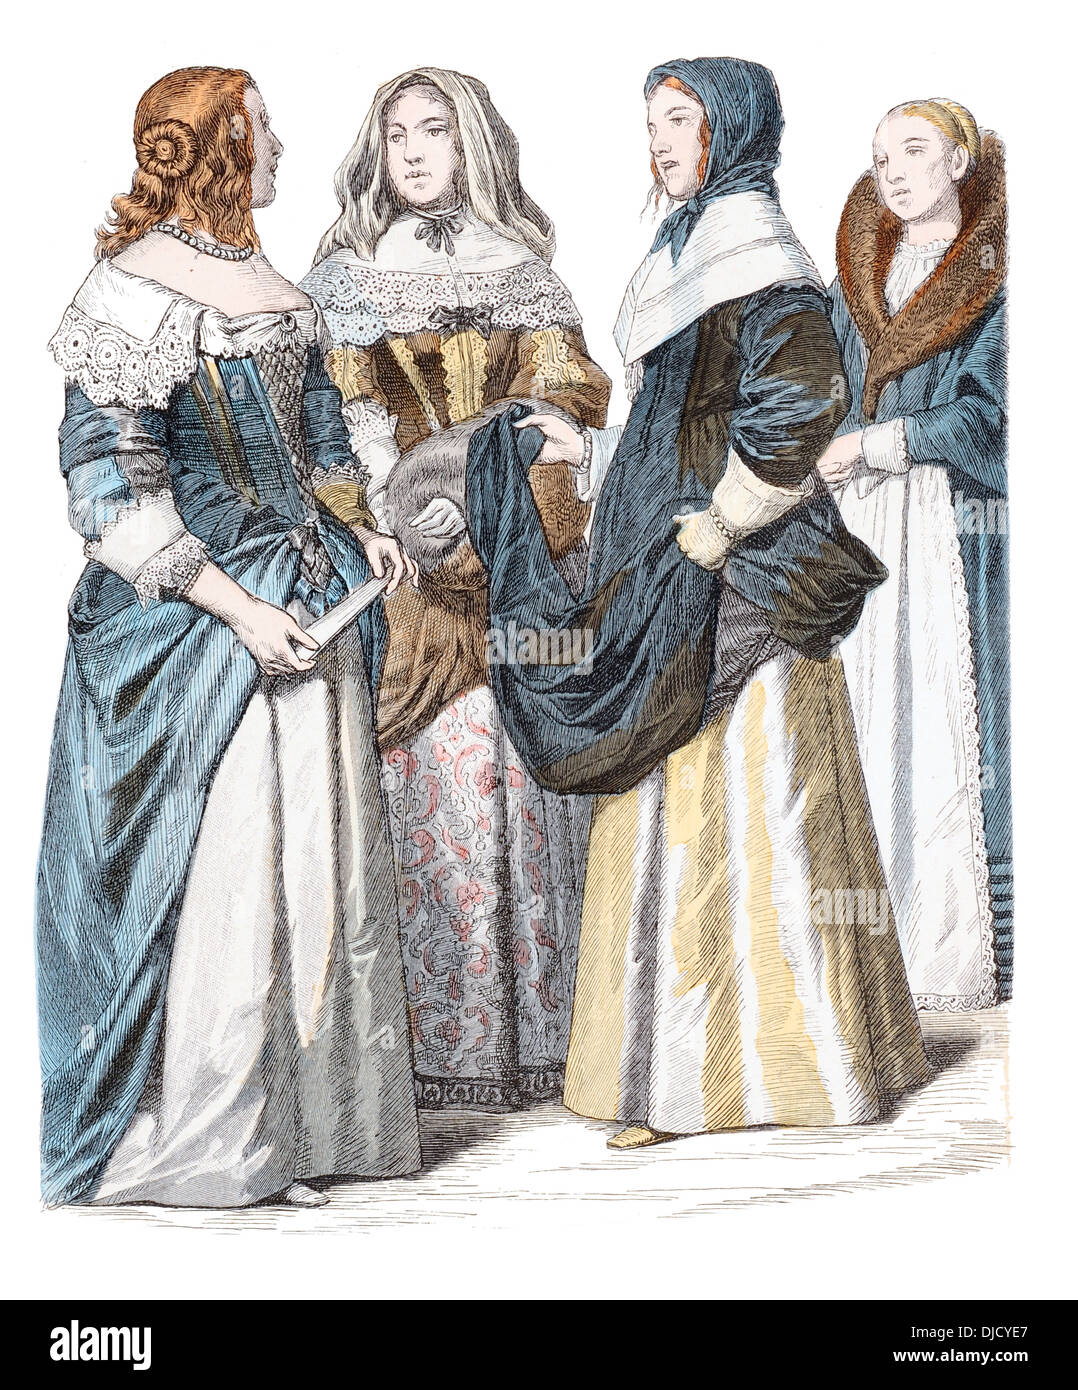 17th century XVII1600s (Left to right) English Noble Lady, French Ladies from Paris Rouen Dieppe. Stock Photo